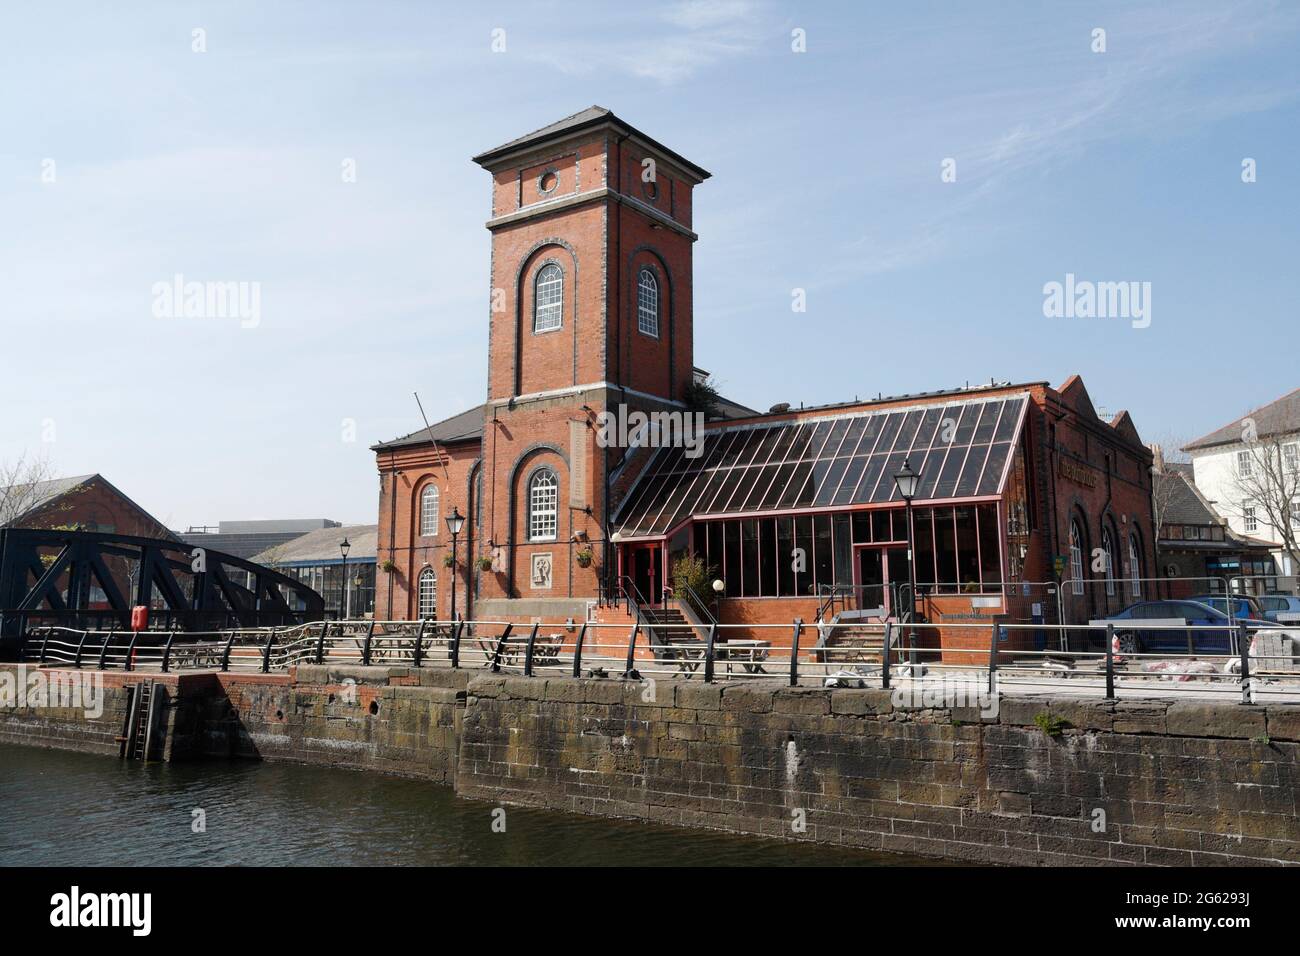 Swansea marina and the former Pump House building converted to a bar, Wales UK Stock Photo